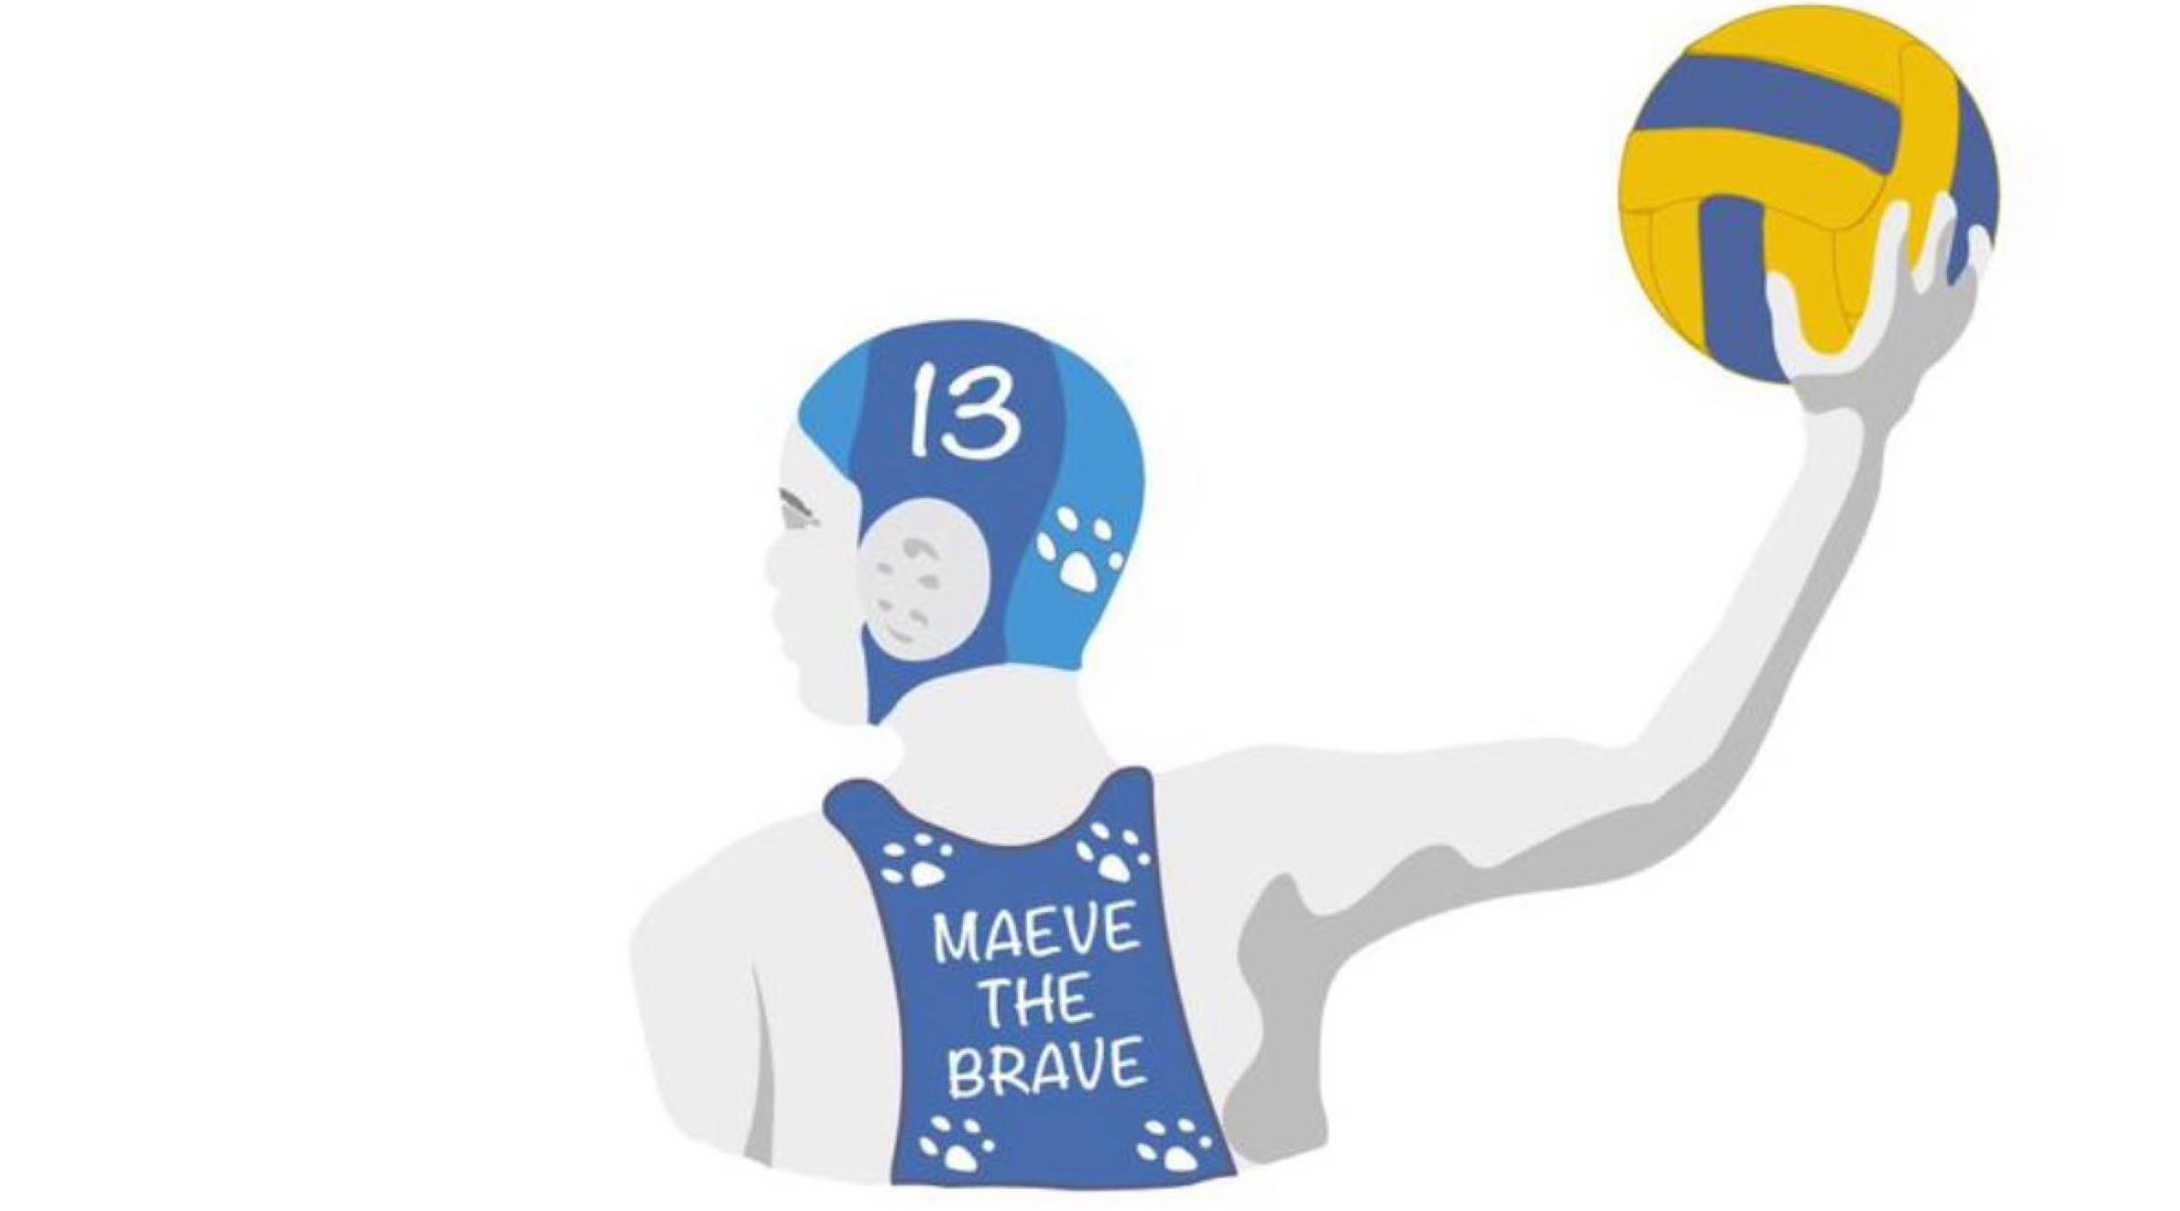 2180x1211 Maeve the Brave Water Polo Tournament